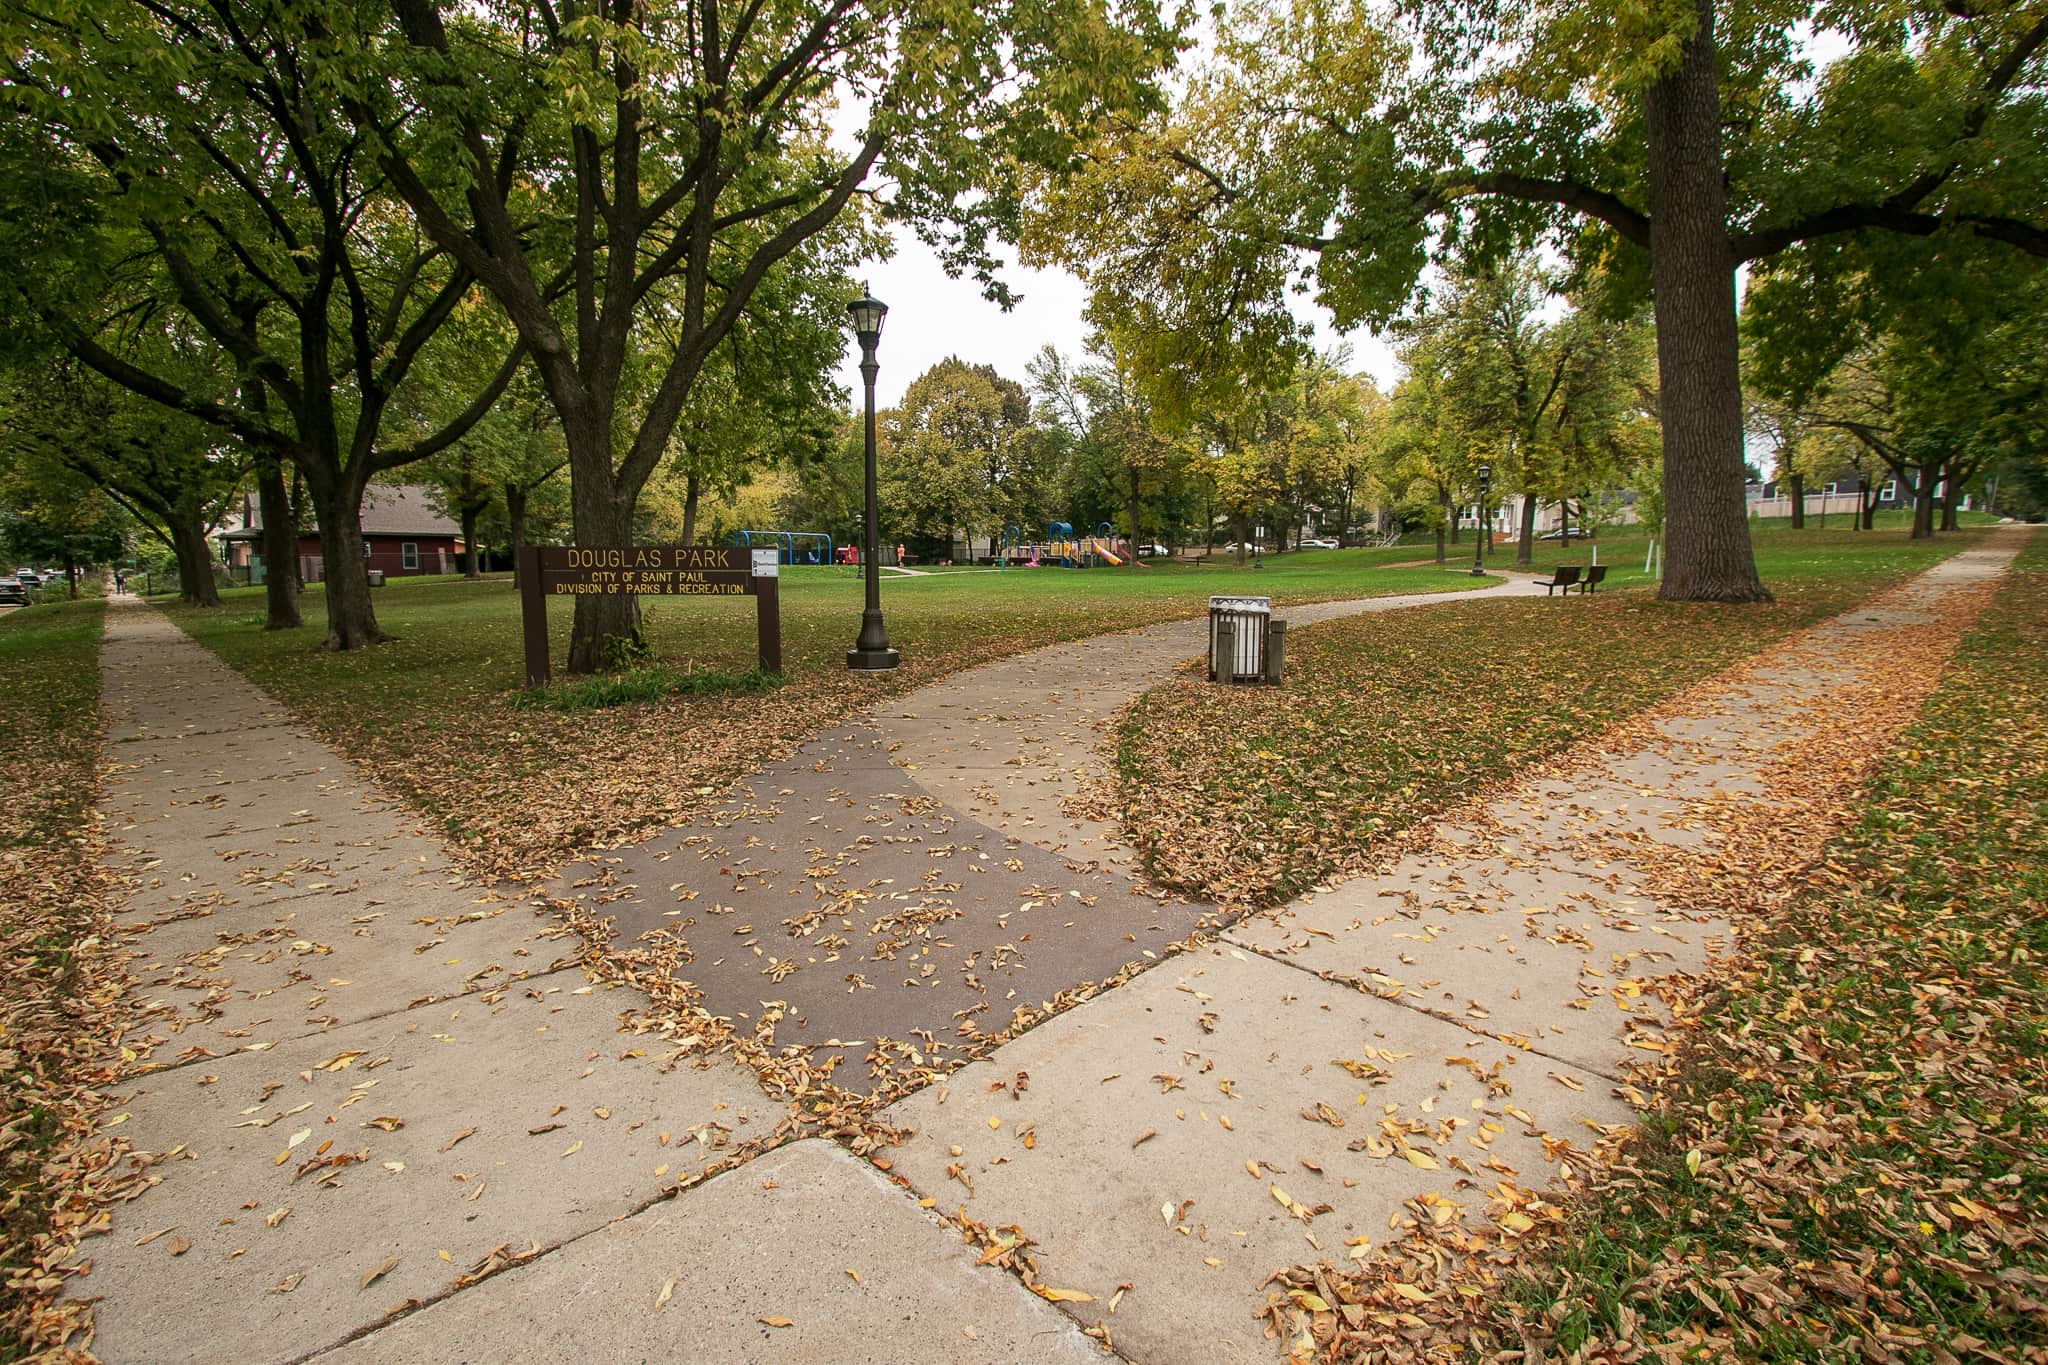 The northwest gateway into Douglas Park. The sidewalk to the right parallels Orleans Street and the sidewalk on the right is next to Stevens Street.